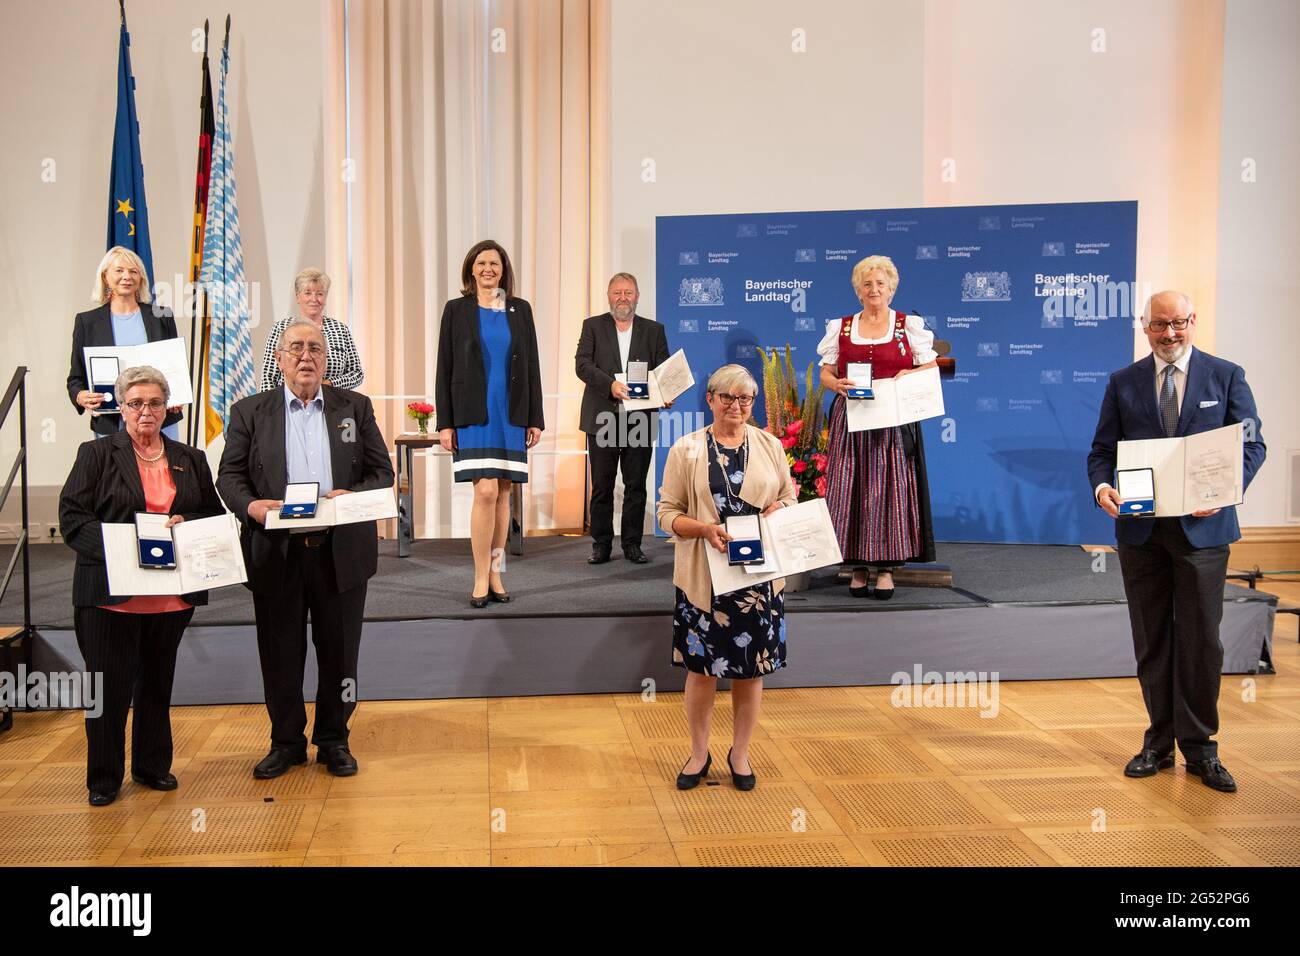 25 June 2021, Bavaria, Munich: Ilse Aigner (CSU, M), President of the  Bavarian State Parliament, stands in the middle of the honoured persons  during the award ceremony of the Bavarian Constitutional Medal